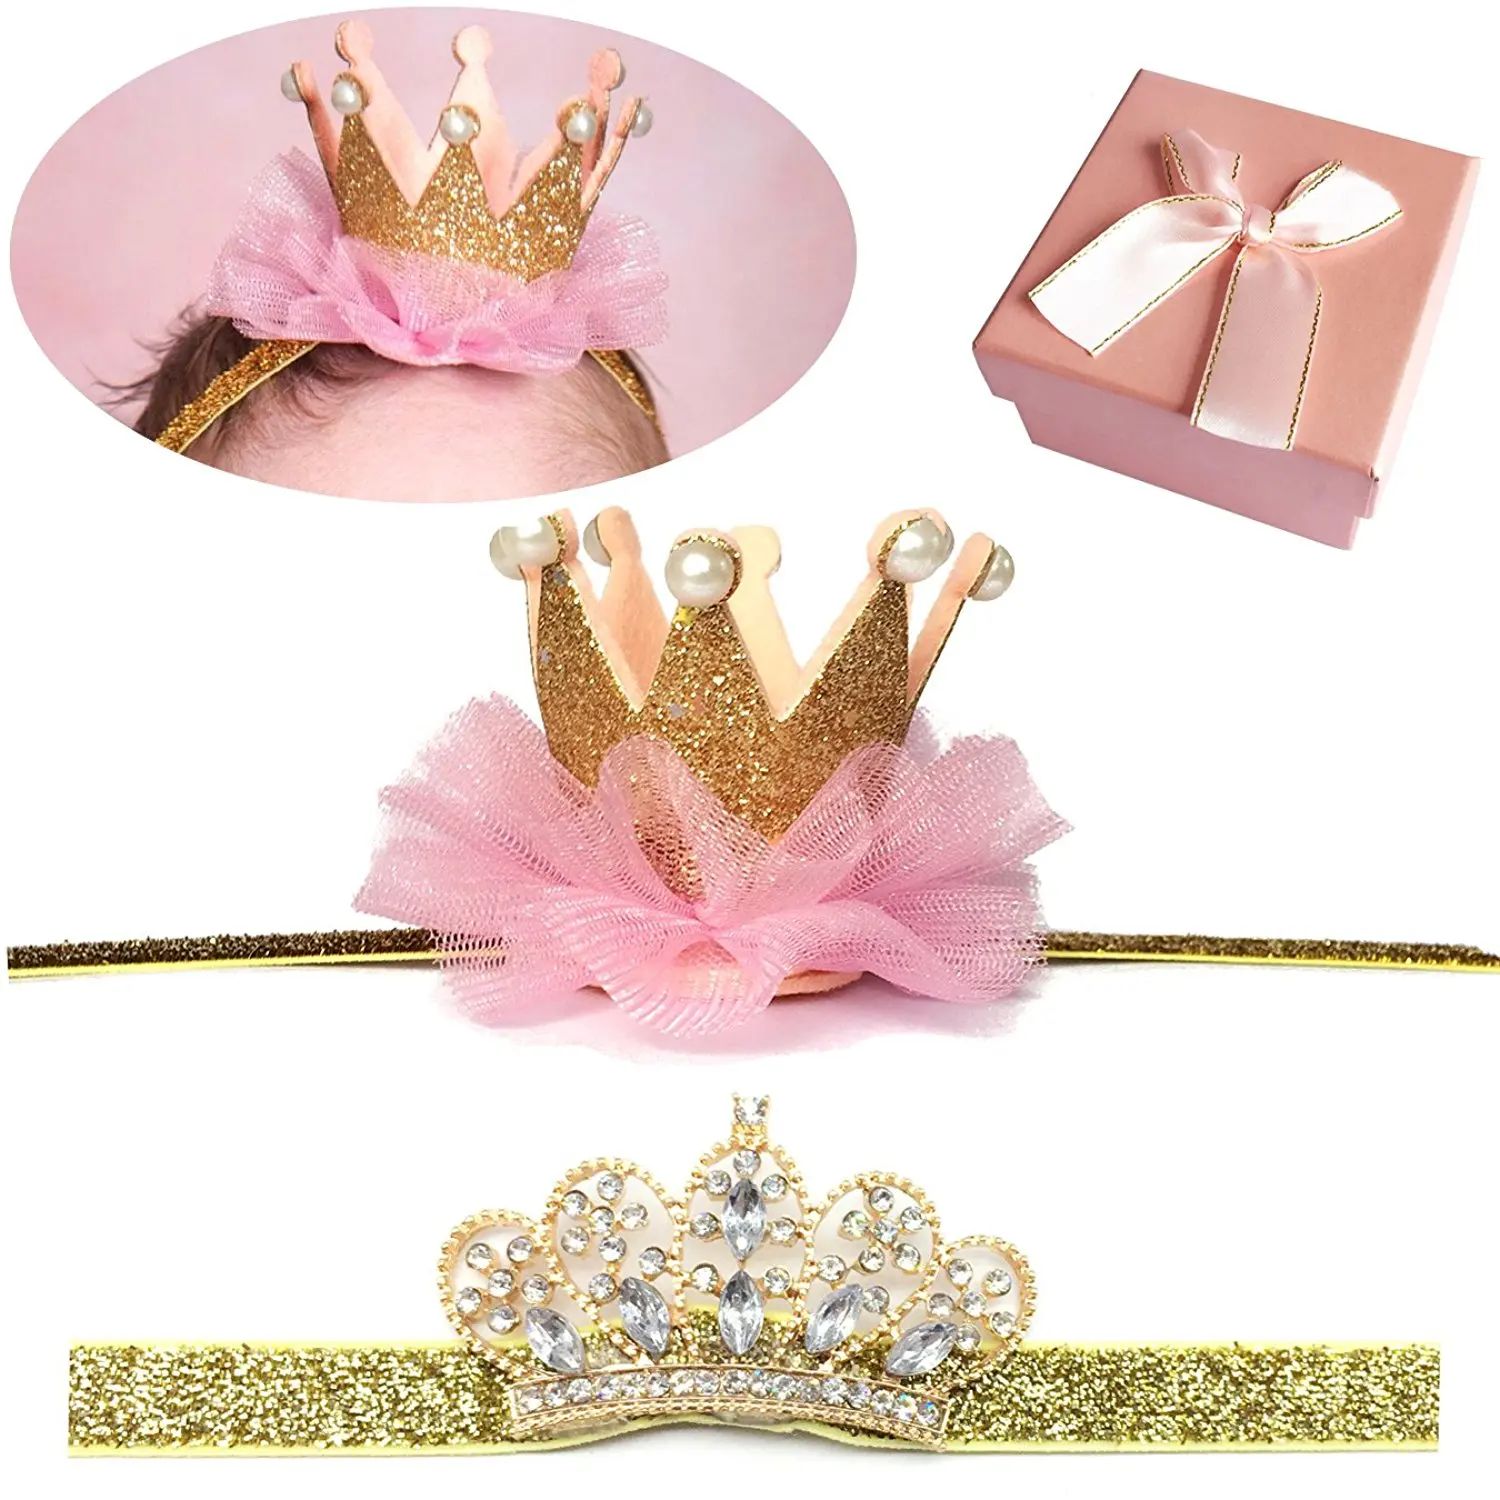 Glitter Princess of Hearts Valentines Party Tiara Crown w// Hair Combs The Beistle Co.